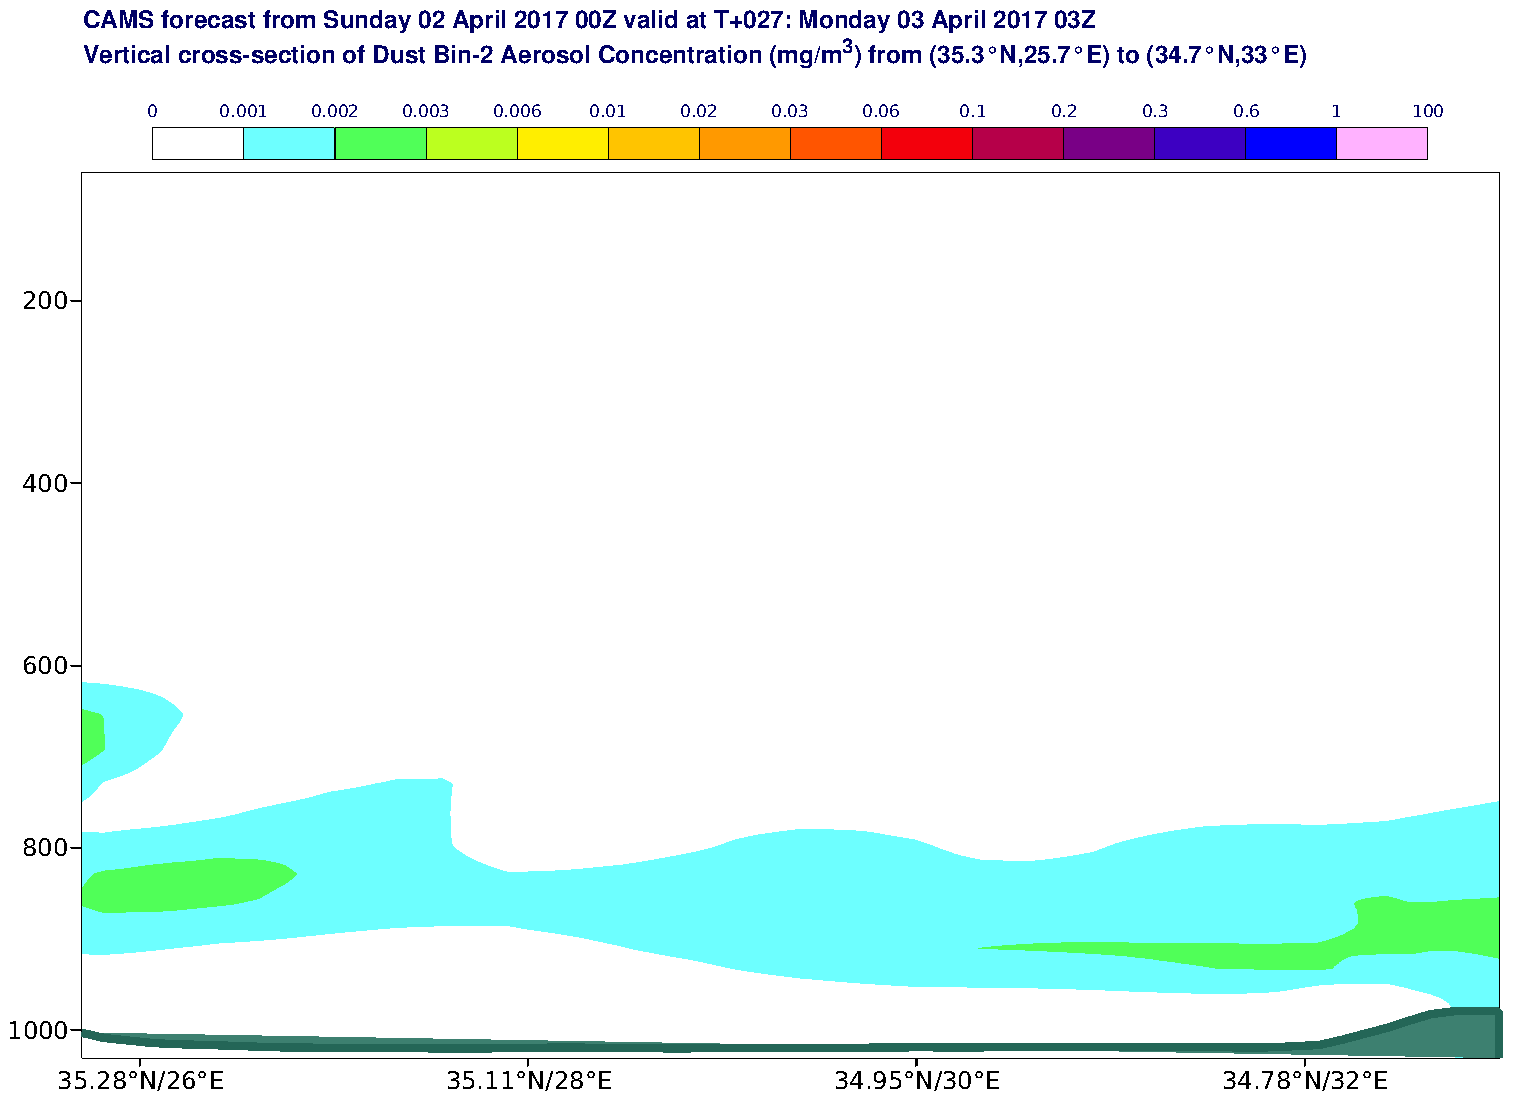 Vertical cross-section of Dust Bin-2 Aerosol Concentration (mg/m3) valid at T27 - 2017-04-03 03:00